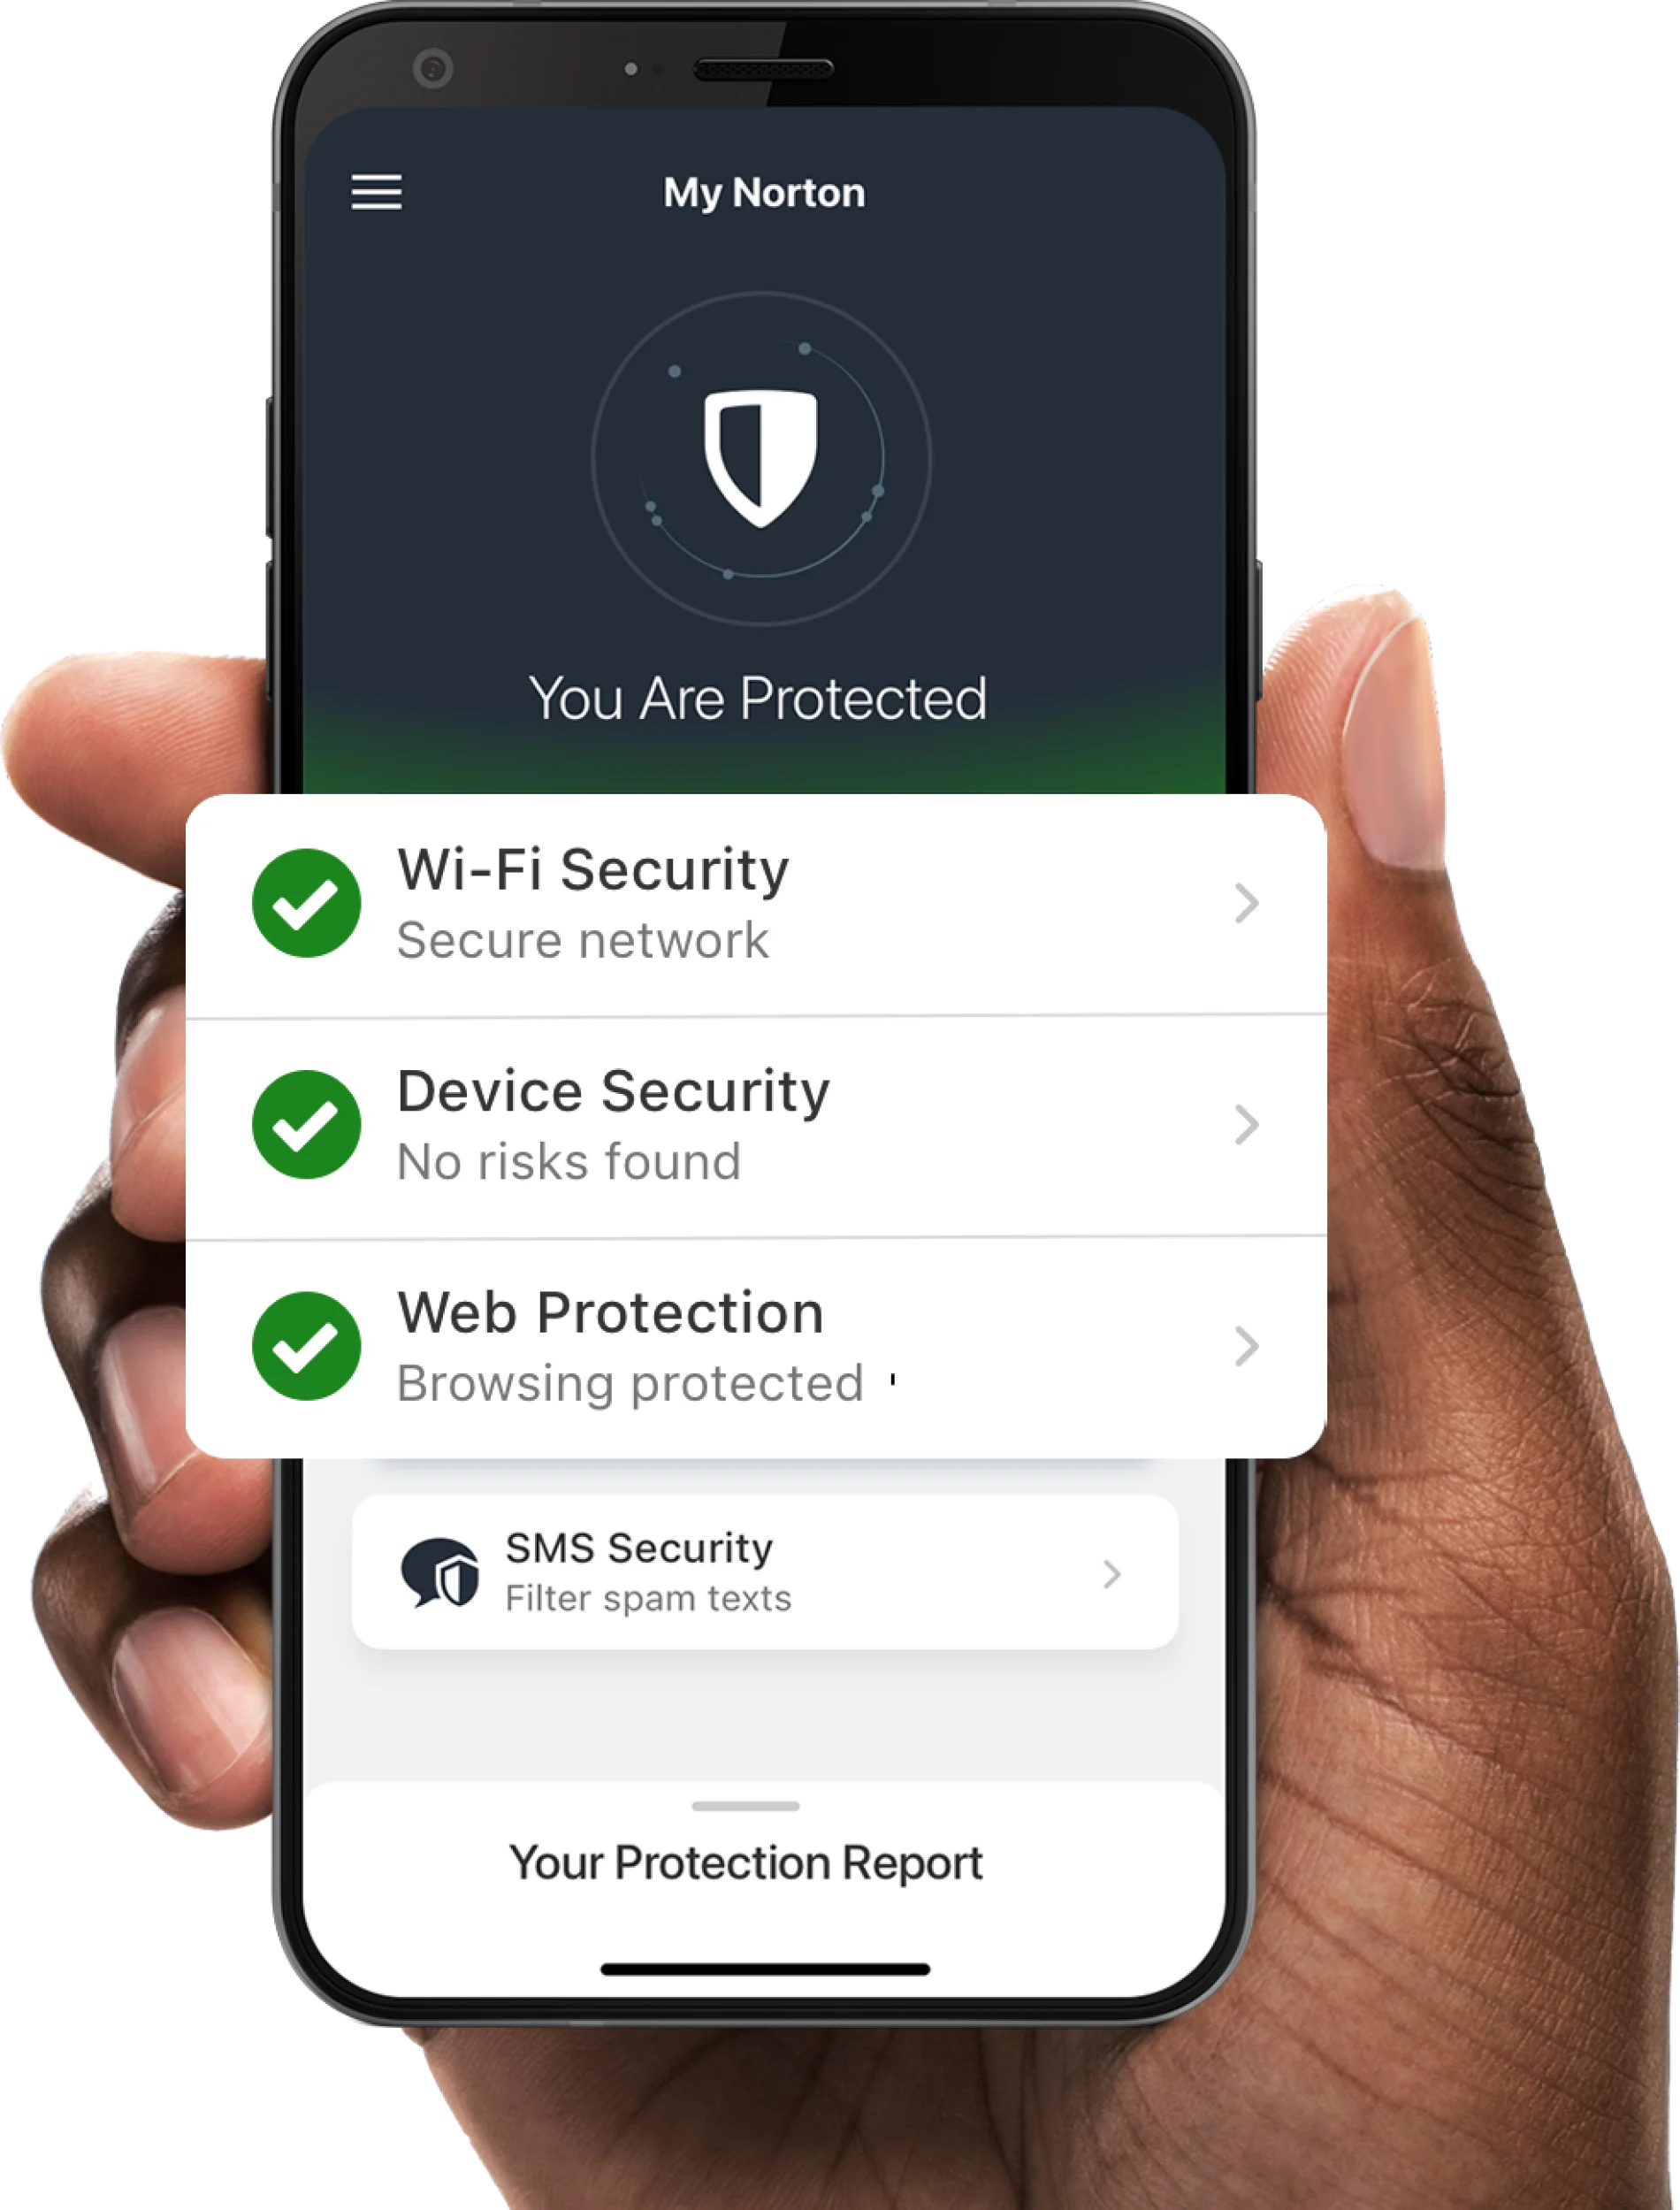 A phone with the My Norton app screen displaying a secured network, secure devices and web protection.